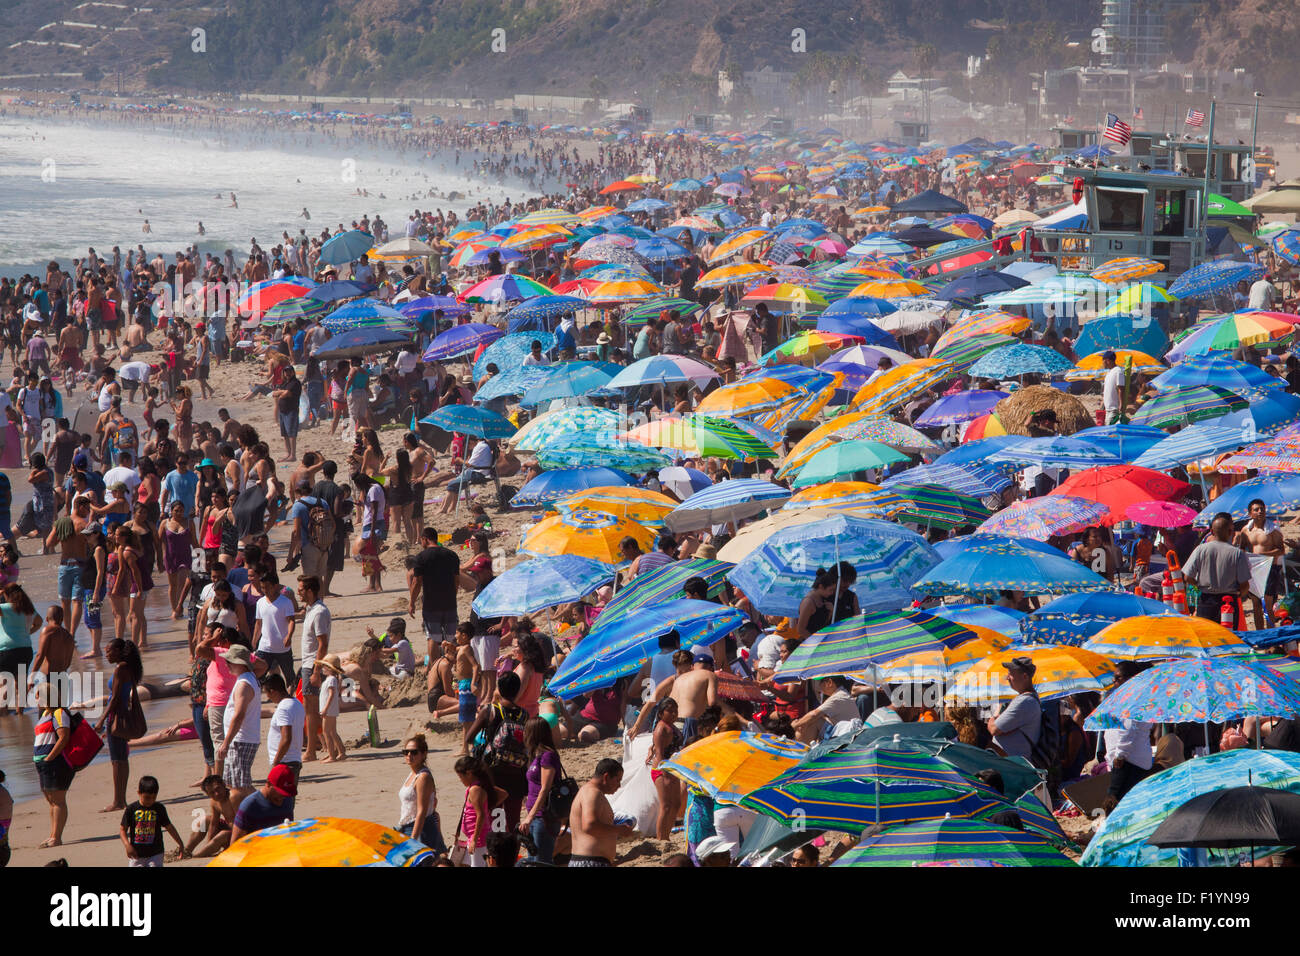 View from the Santa Monica Pier, a crowded, hot Labor Day - Monday September 7, 2015 - Santa Monica, Los Angeles county, Califor Stock Photo